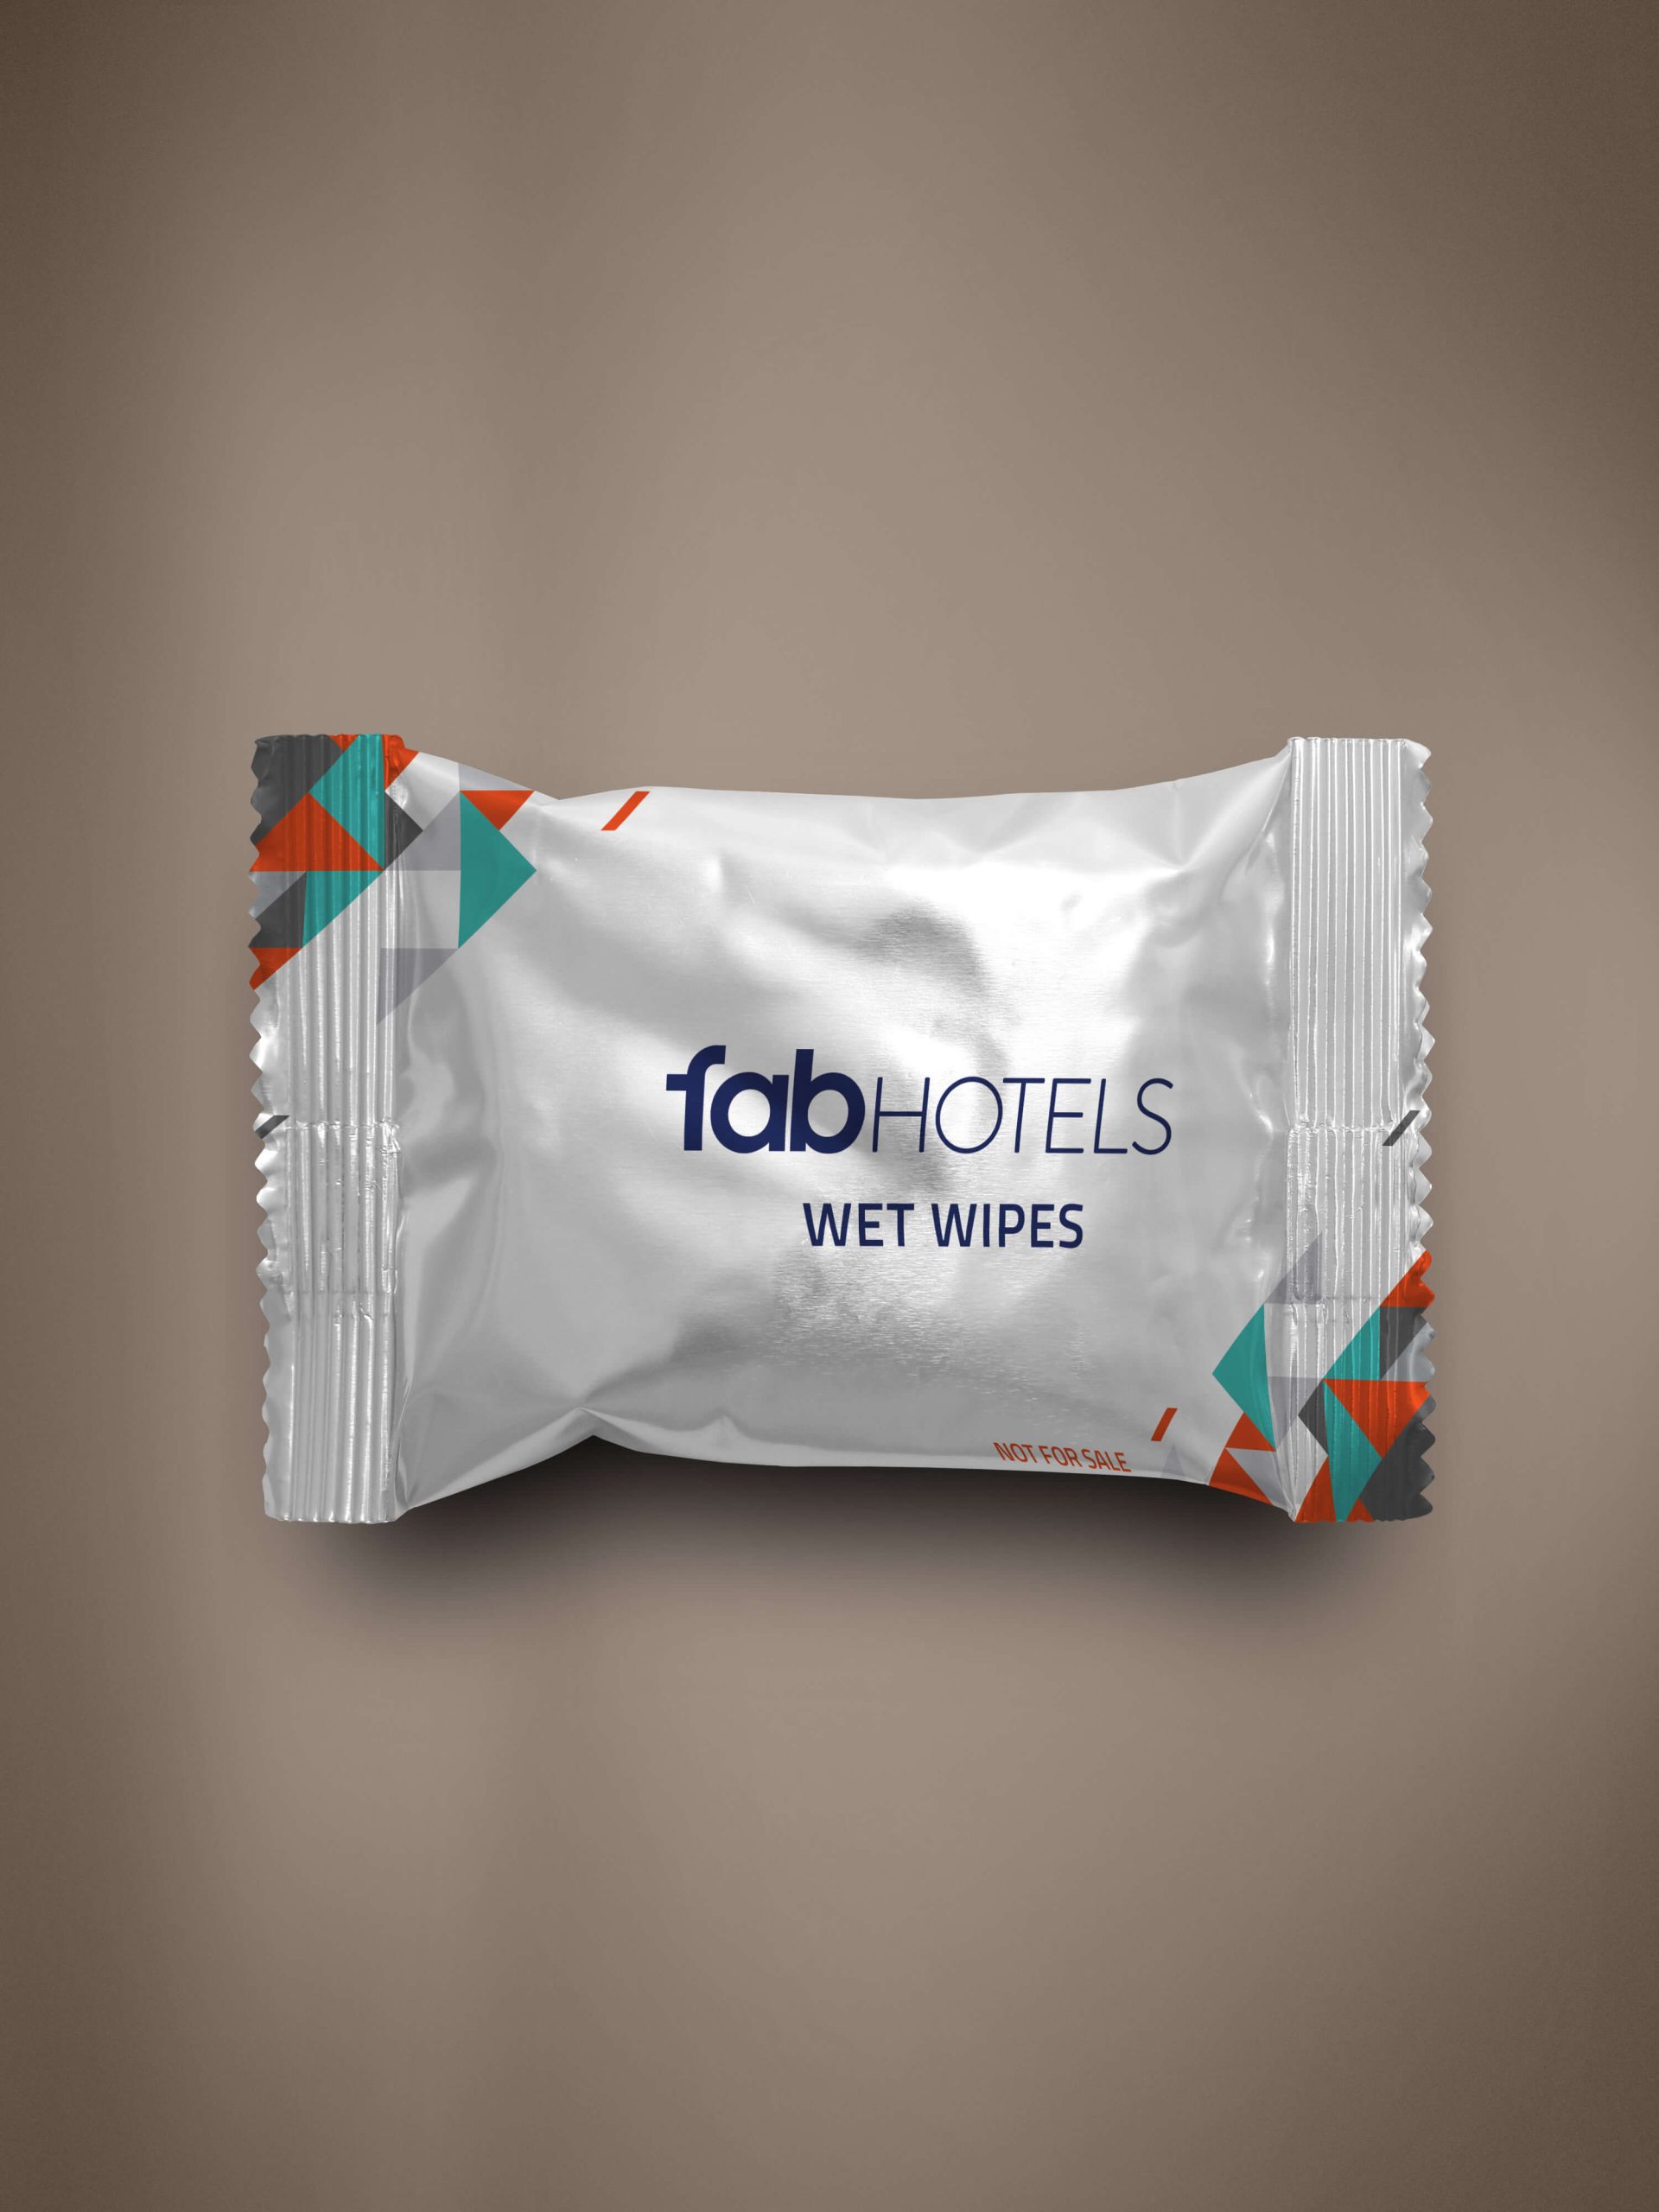 Fabhotels-Hotel-Wet-Wipes-front